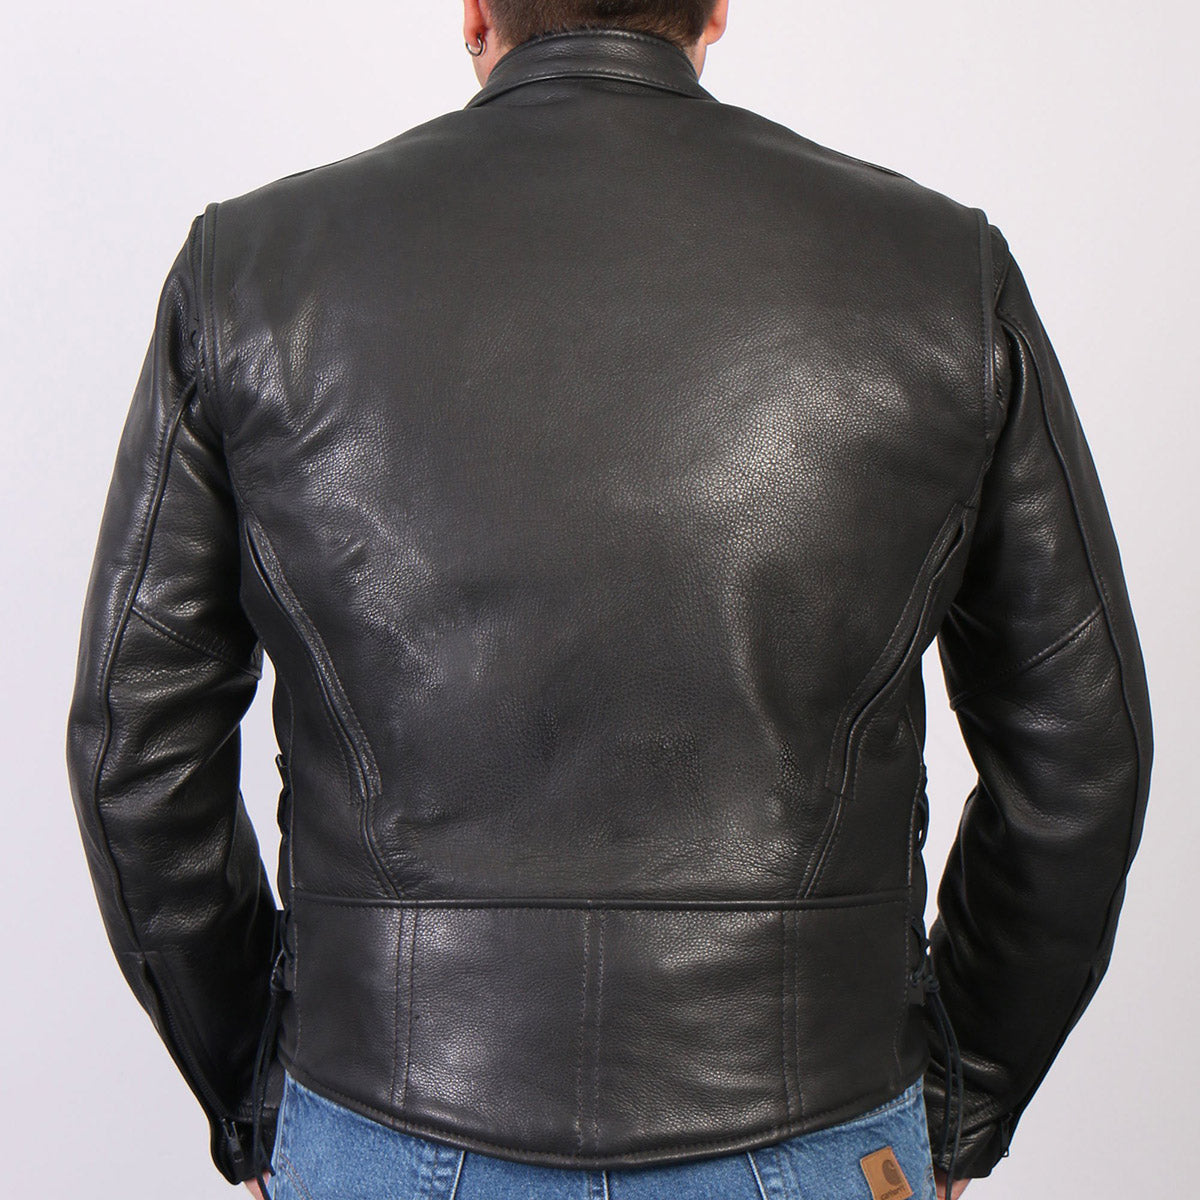 Hot Leathers JKM5002 USA Made Men's Black Vented Premium Leather Motorcycle Jacket with Side Lace